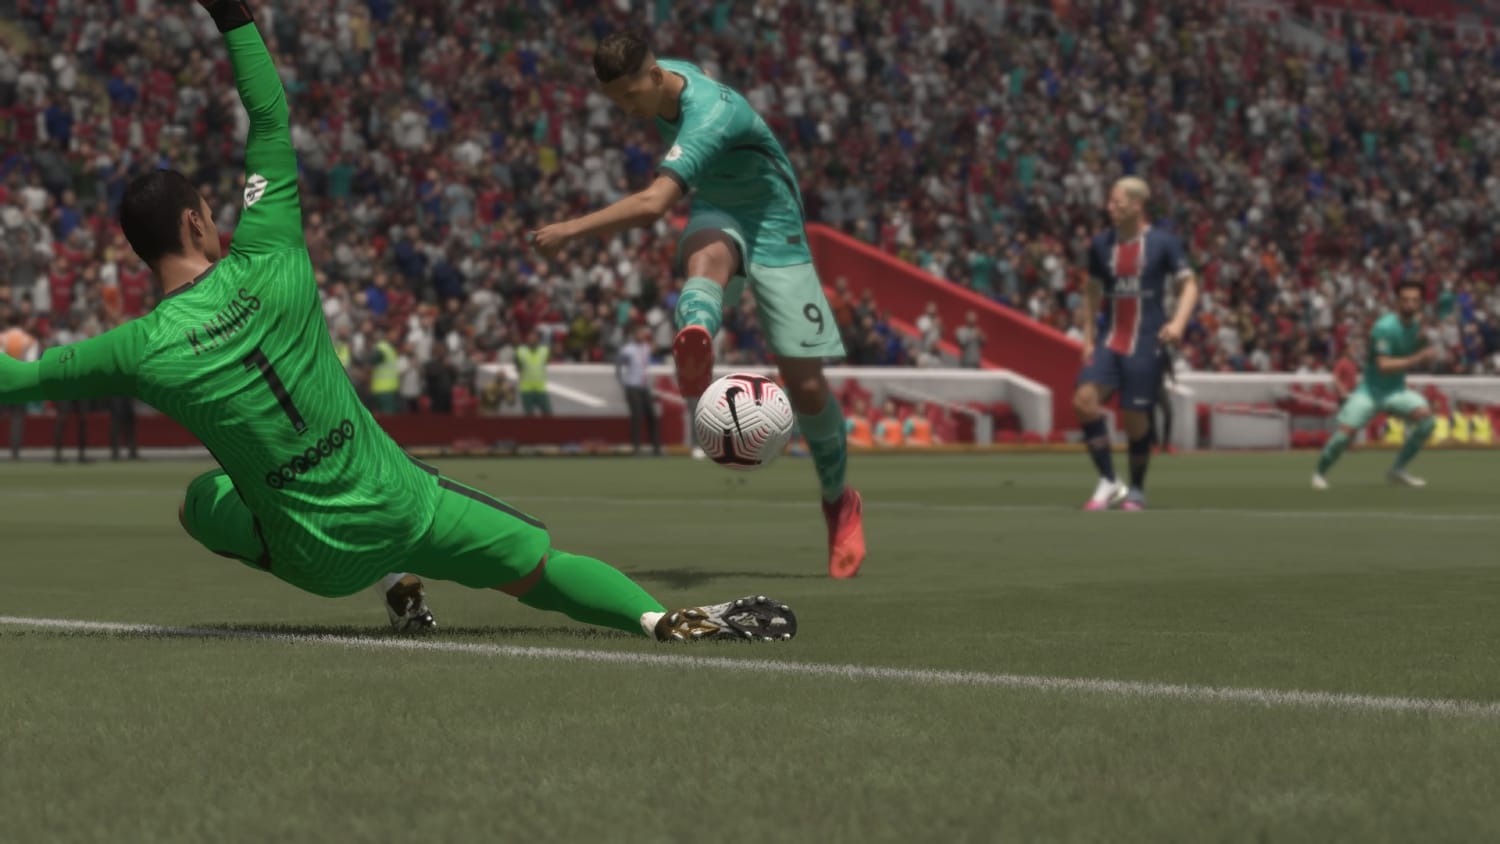 7 Fifa 21 tips from the pros who destroyed me